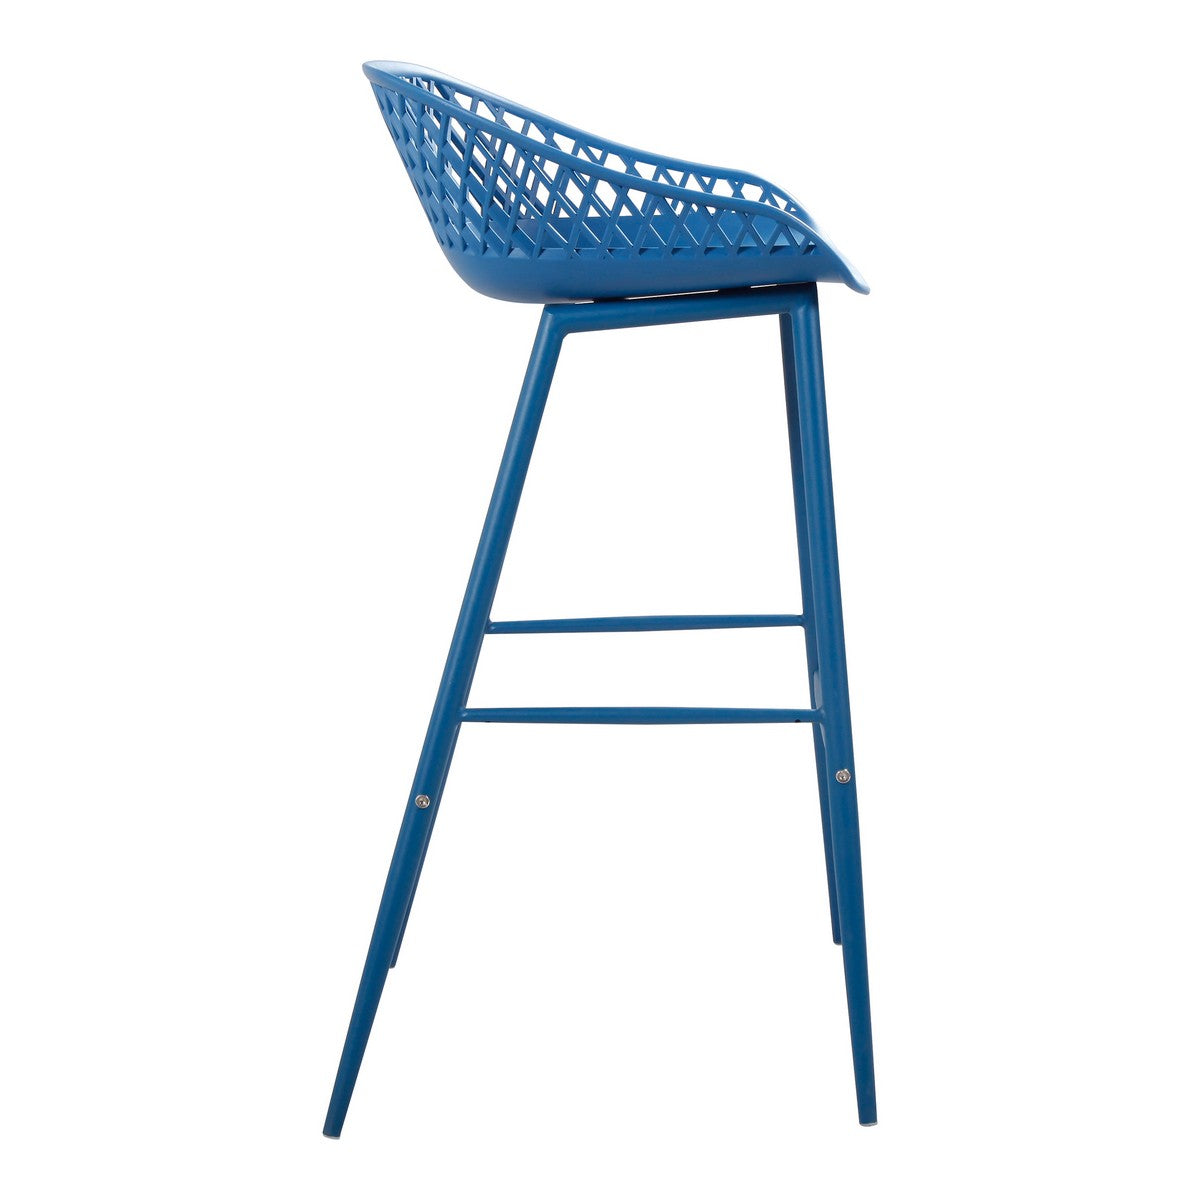 Moe's Home Collection Piazza Outdoor Barstool Blue-Set of Two - QX-1004-26